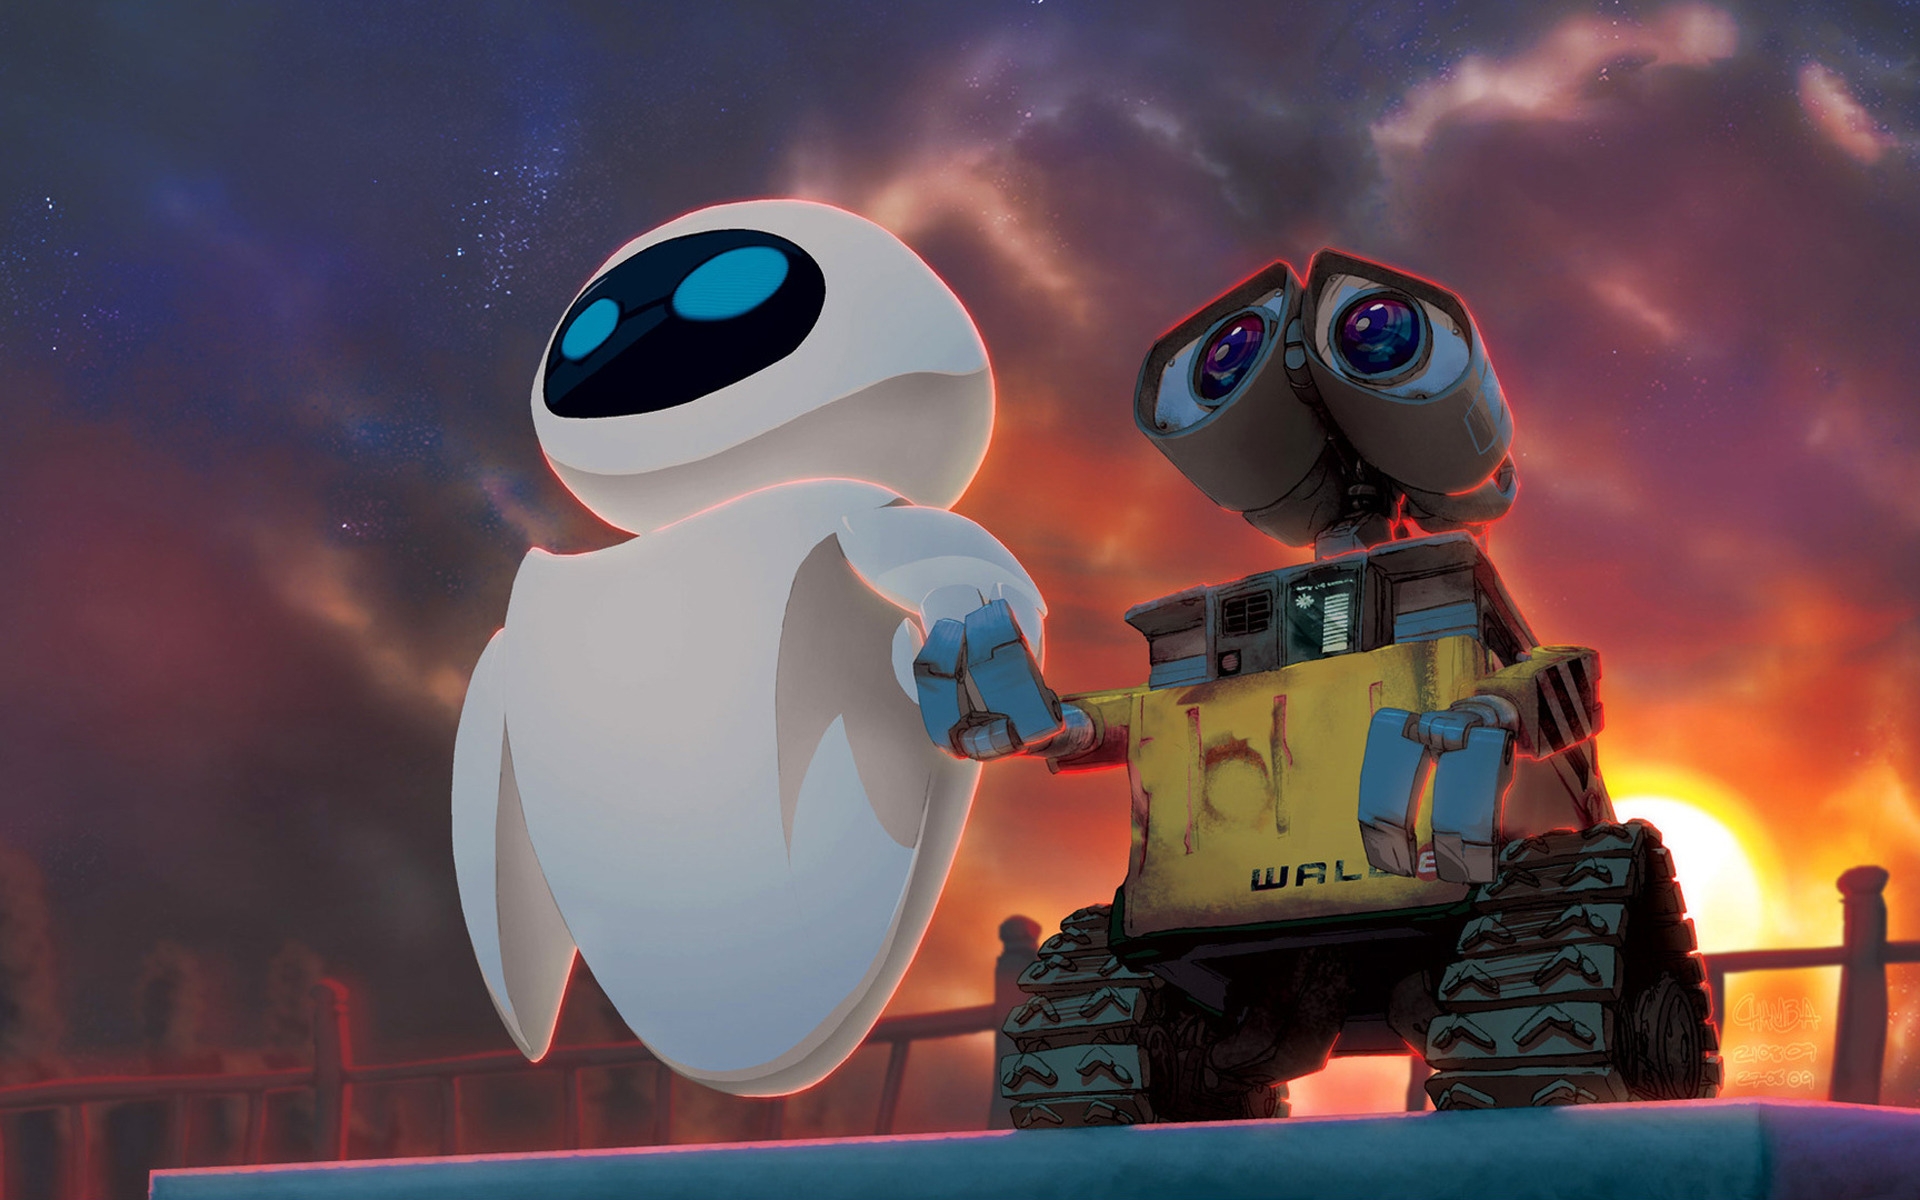 Walle Cartooned for 1920 x 1200 widescreen resolution